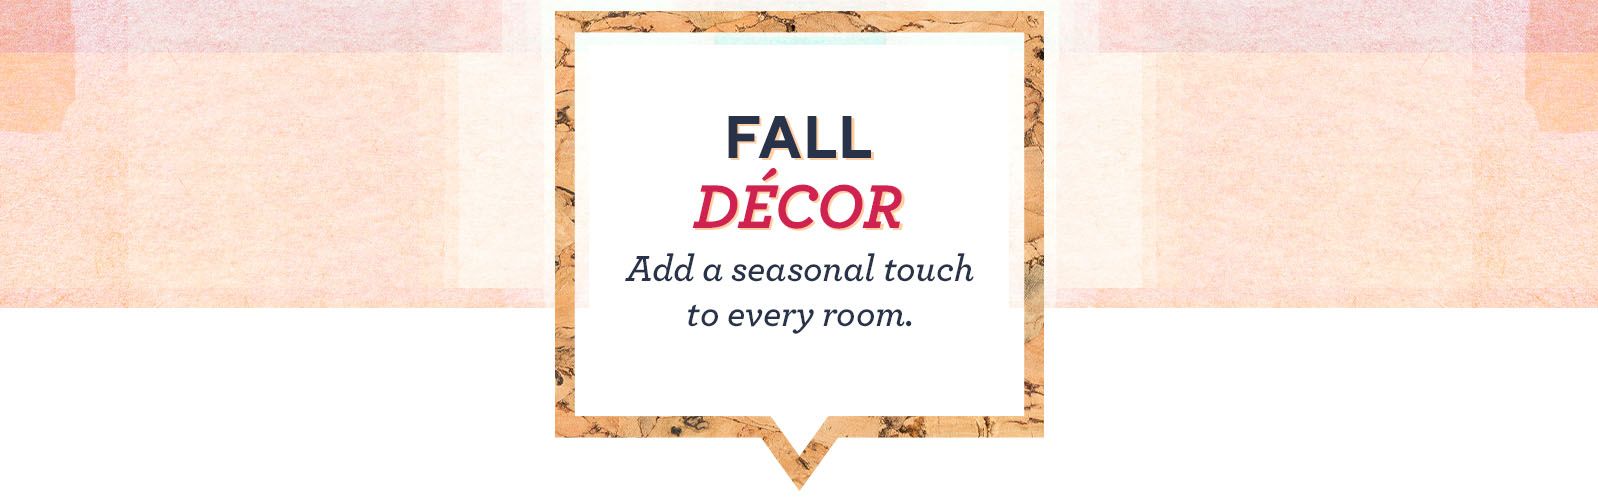 Fall Décor - Add a seasonal touch to every room.